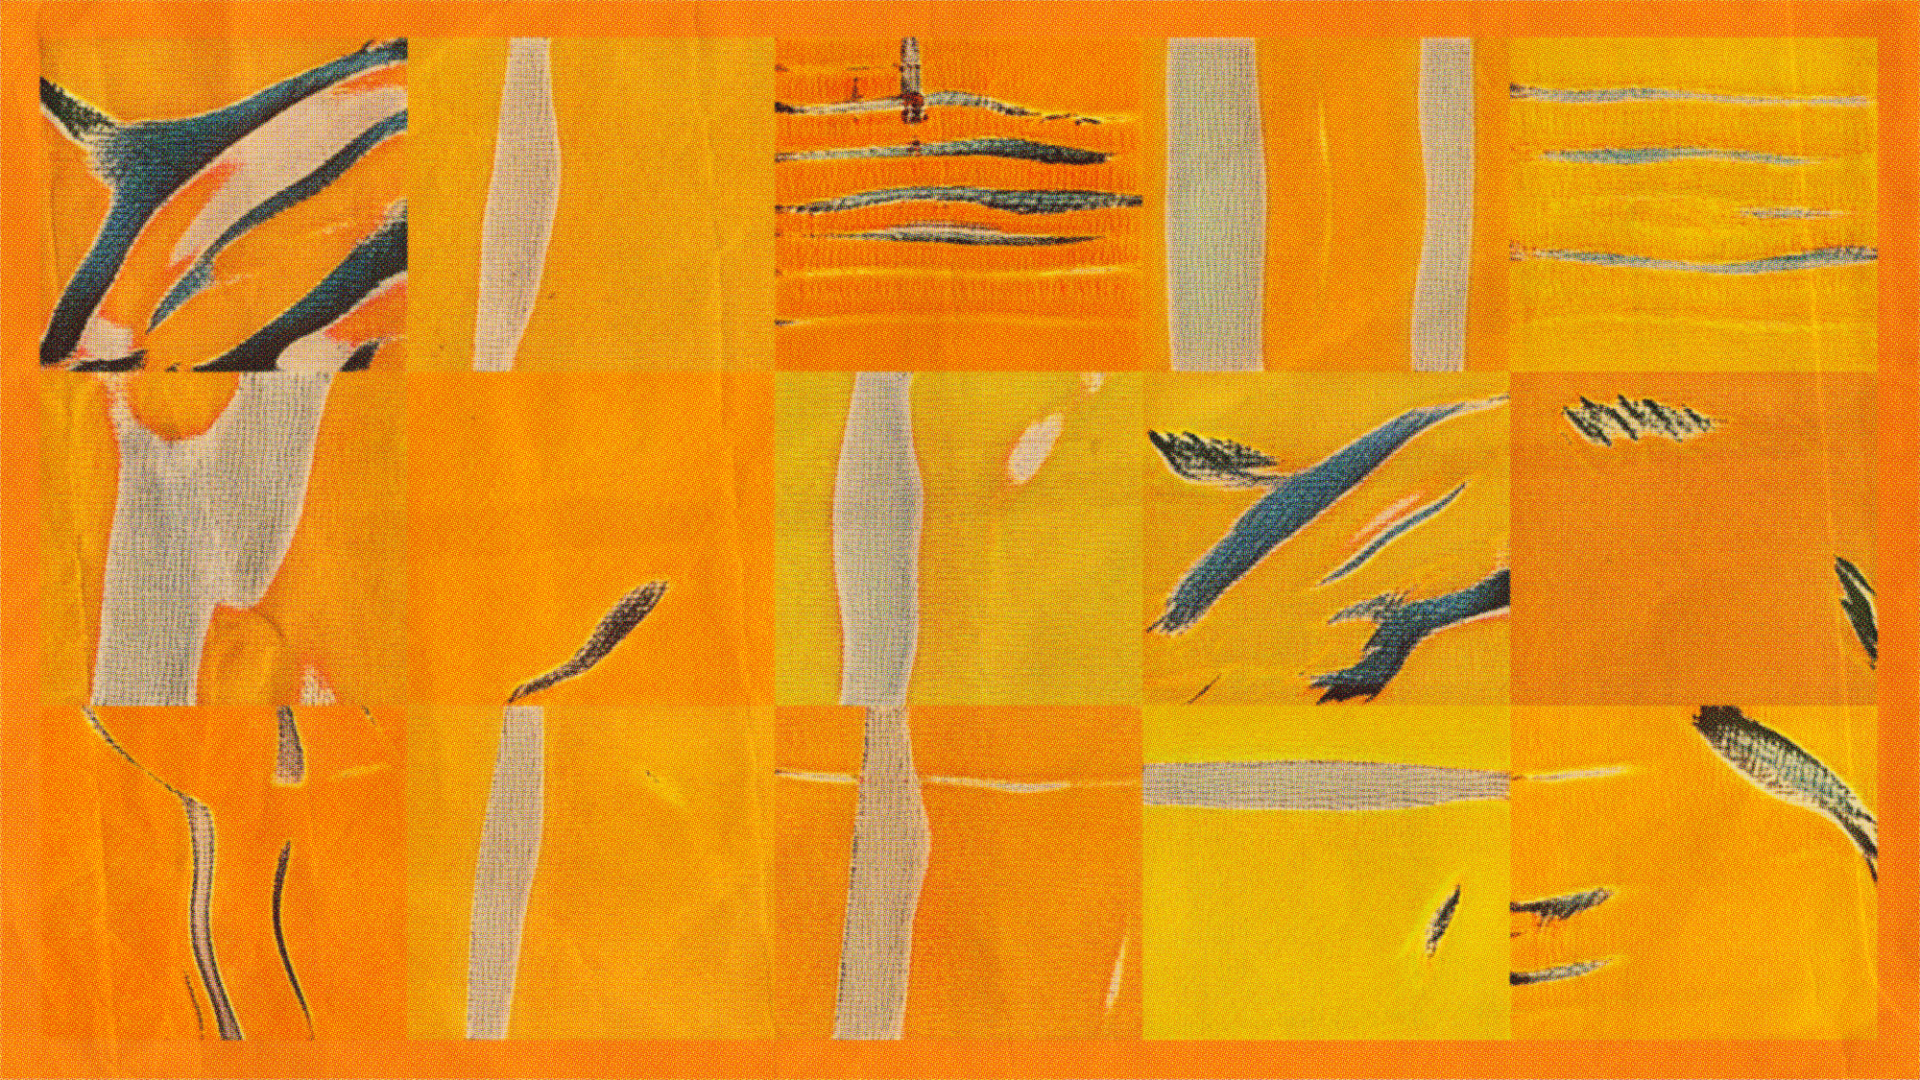 A four-by-three grid of orange and yellow, with sections of plant-like forms in shades of gray